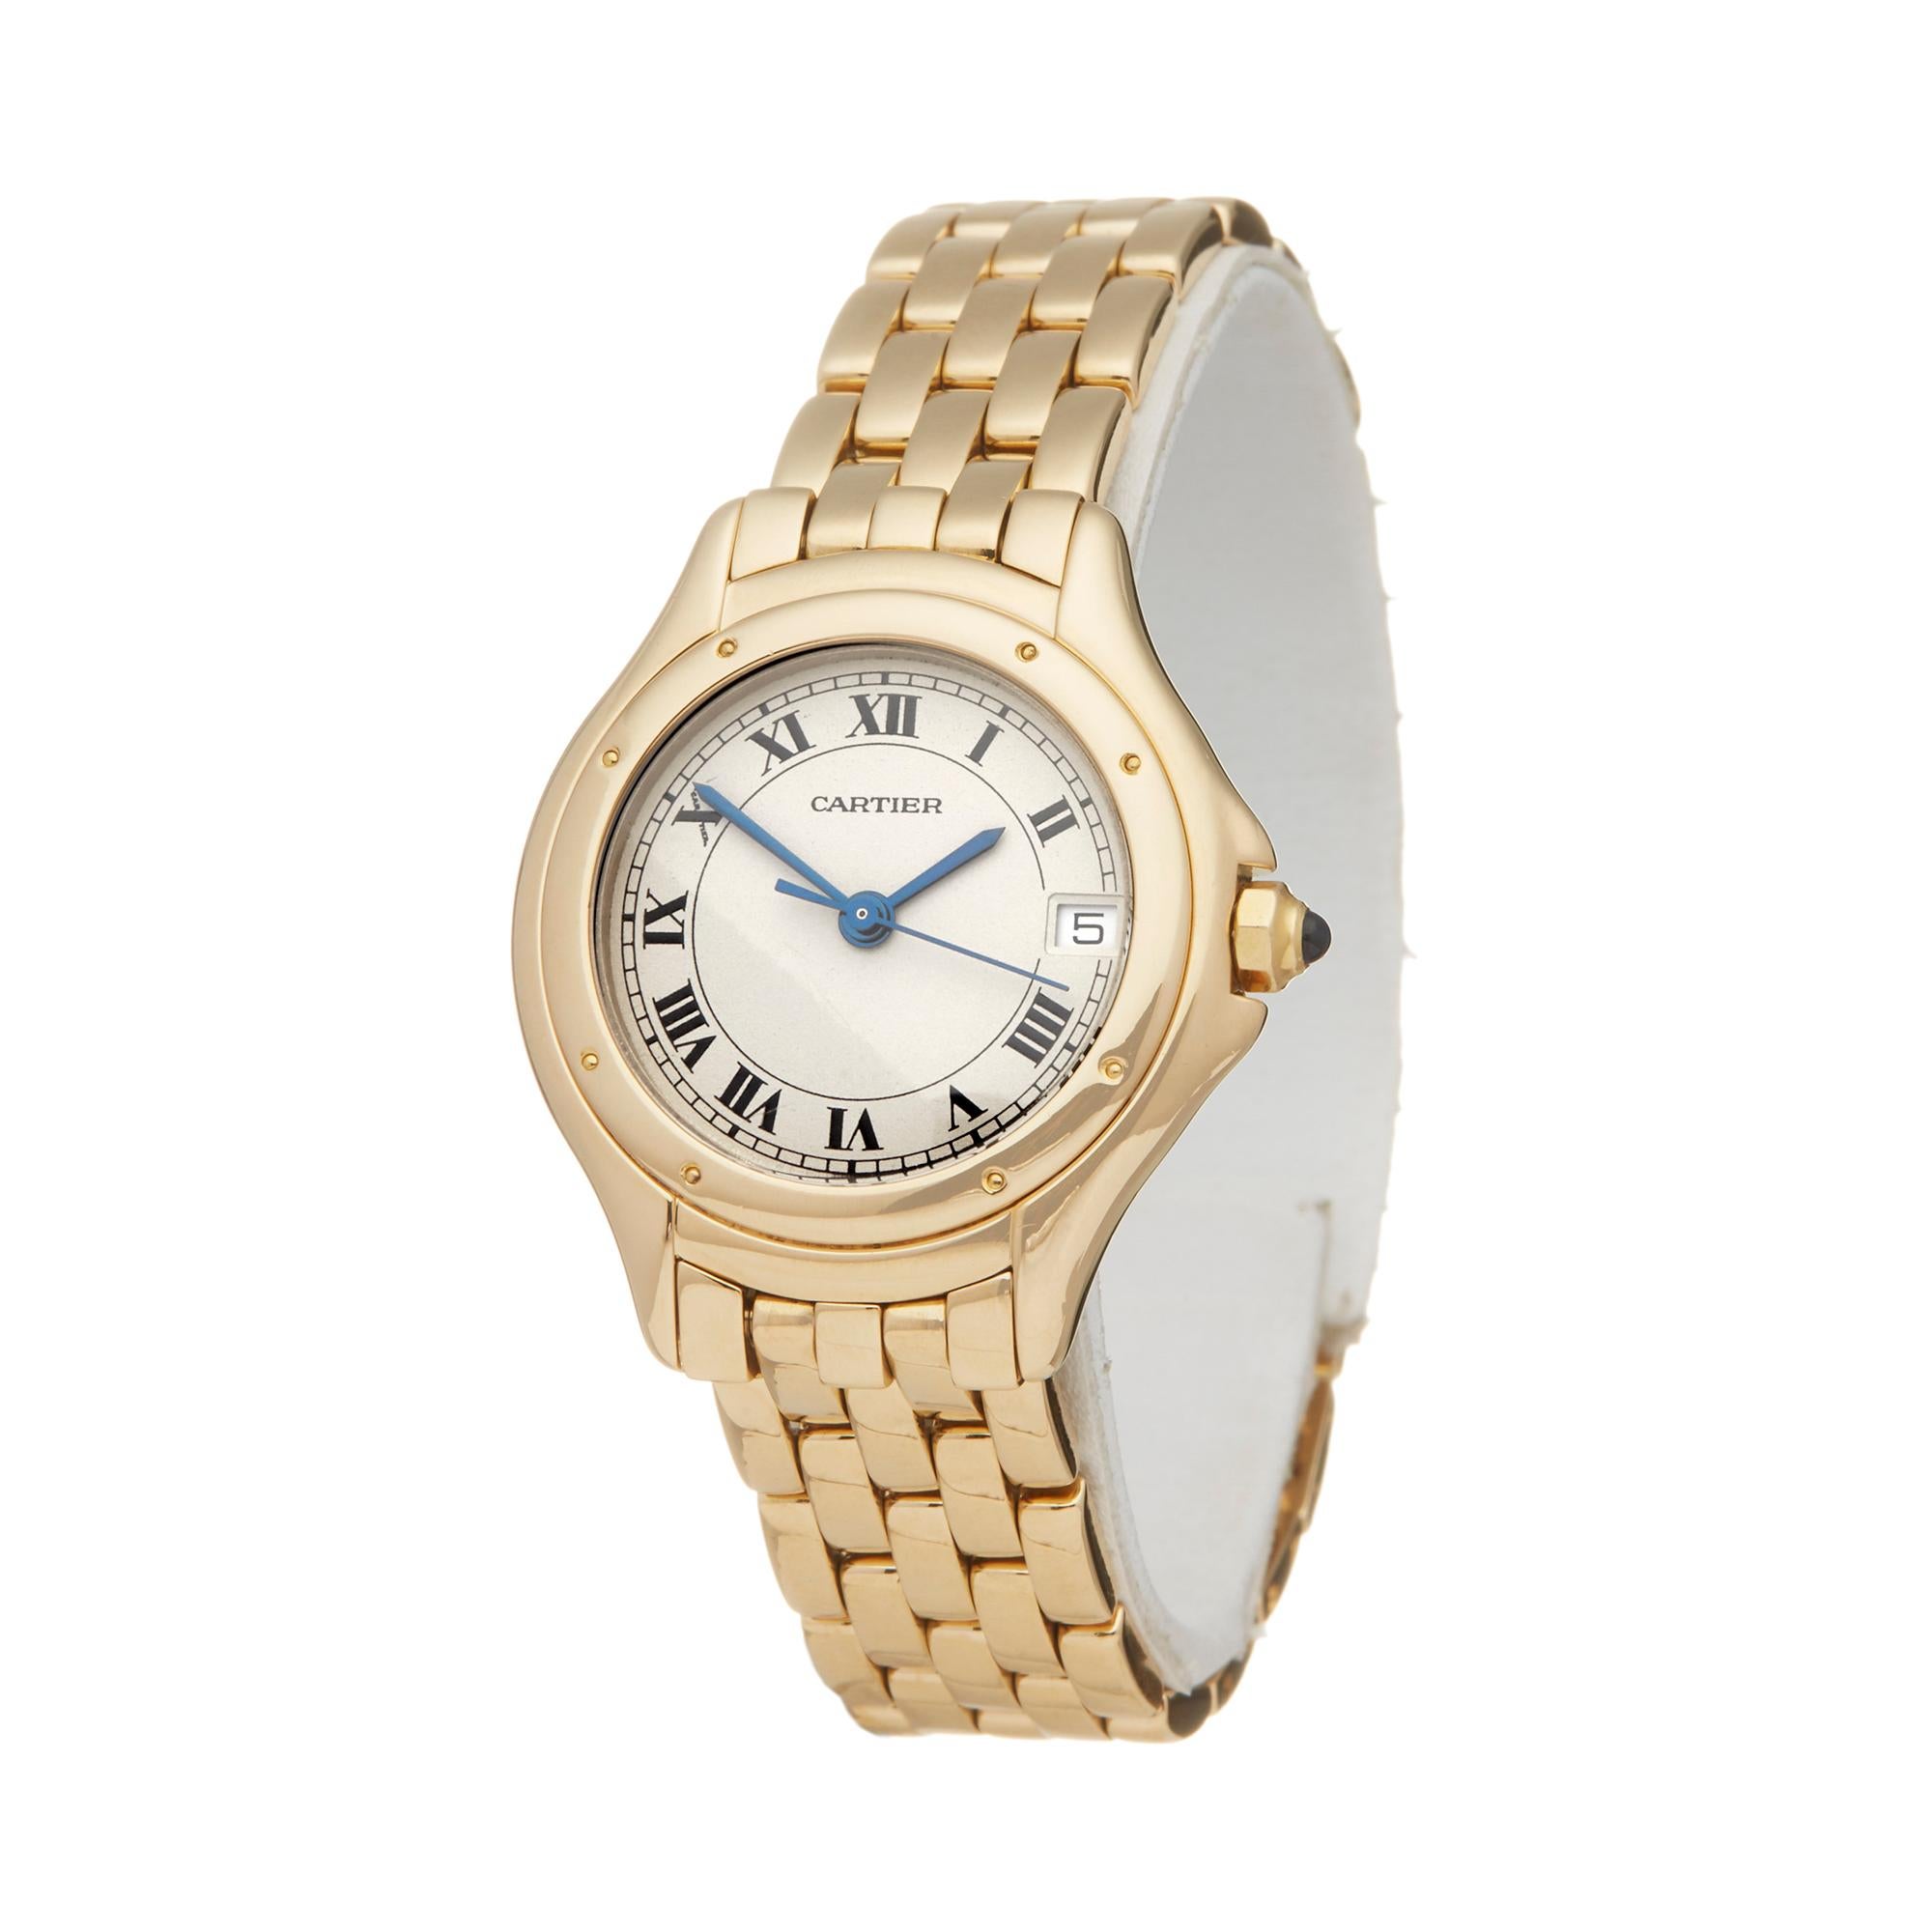 Ref: W5865
Manufacturer: Cartier
Model: Panthère Cougar
Model Ref: 887906
Age: Circa 1990's
Gender: Ladies
Complete With: Box, Service Pouch & Service Papers dated 27th February 2019
Dial: White Roman 
Glass: Sapphire Crystal
Movement: Quartz
Water